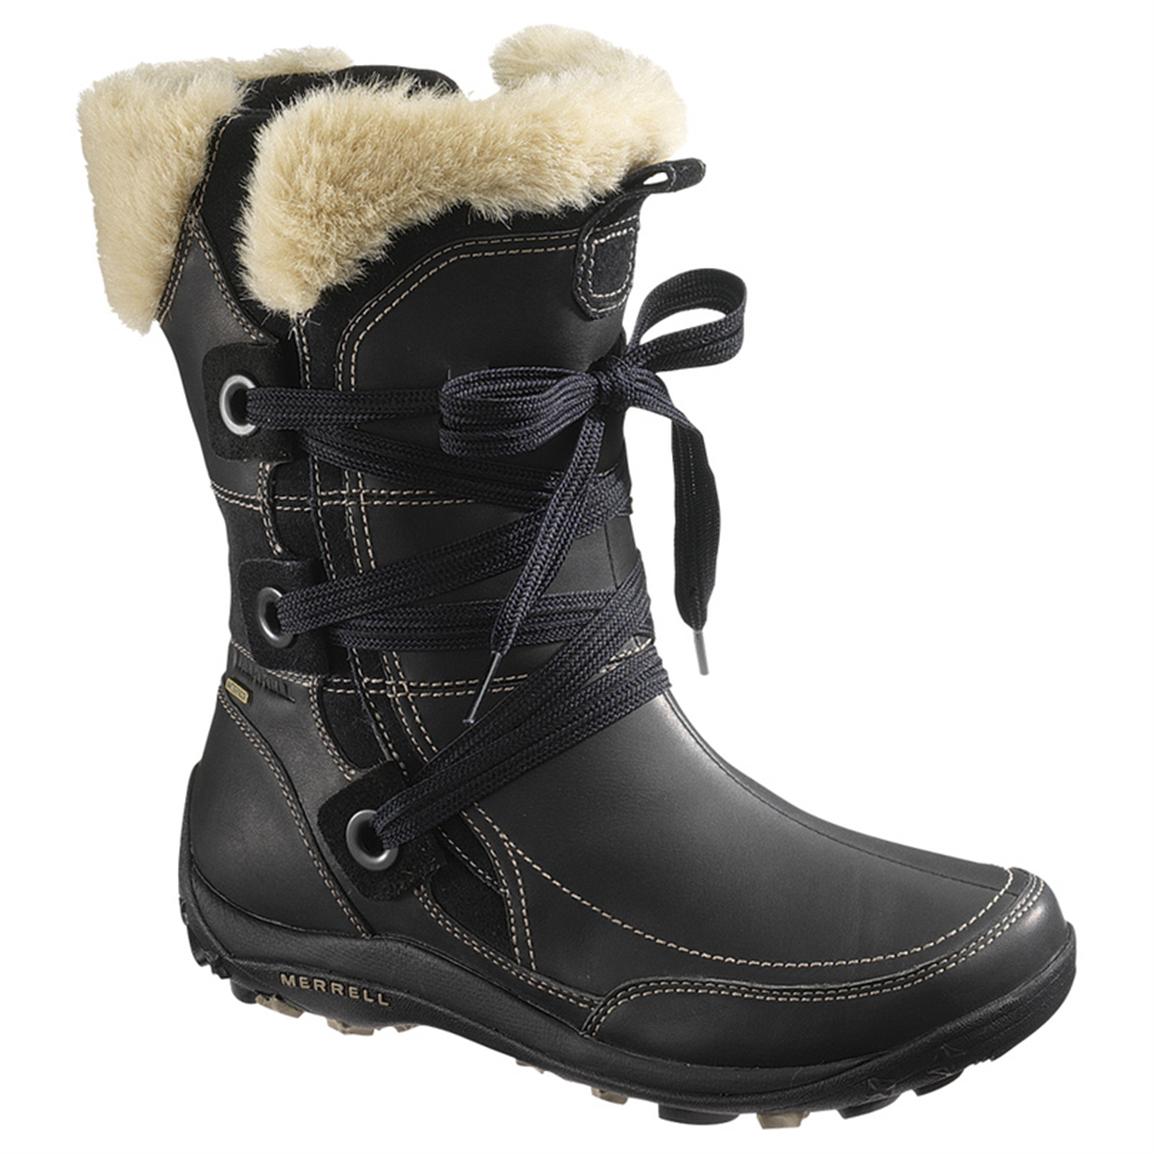 Can we start another thread discussing the best winter boots ...